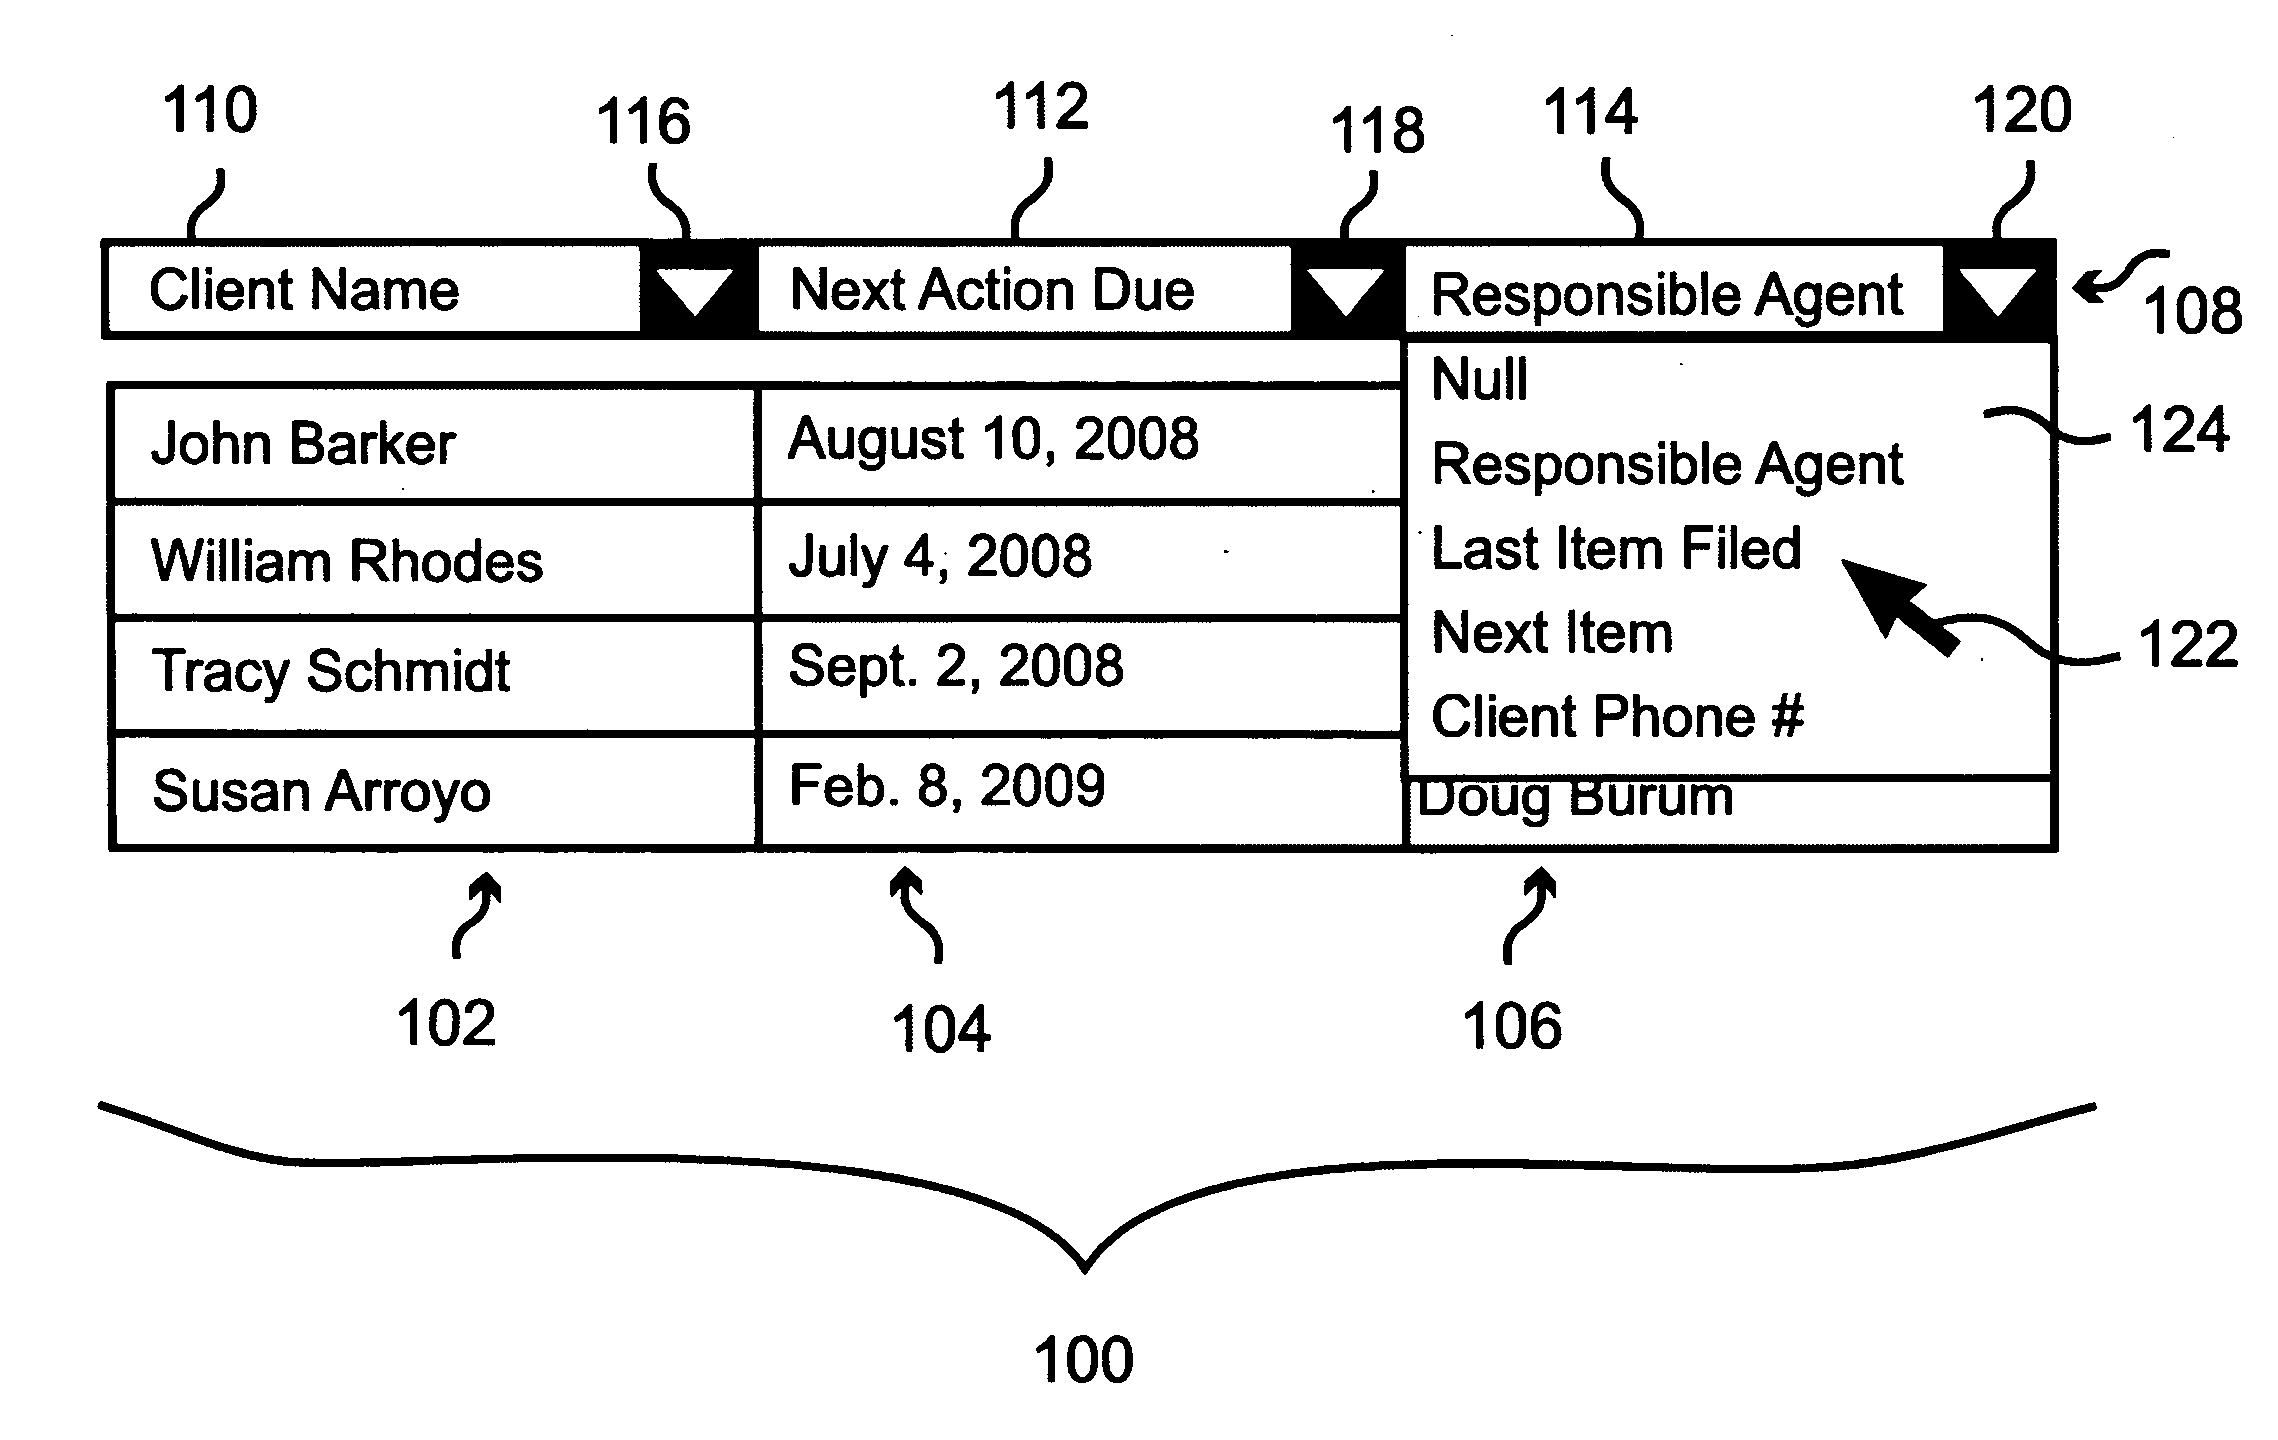 Multi-choice controls for selecting data groups to be displayed